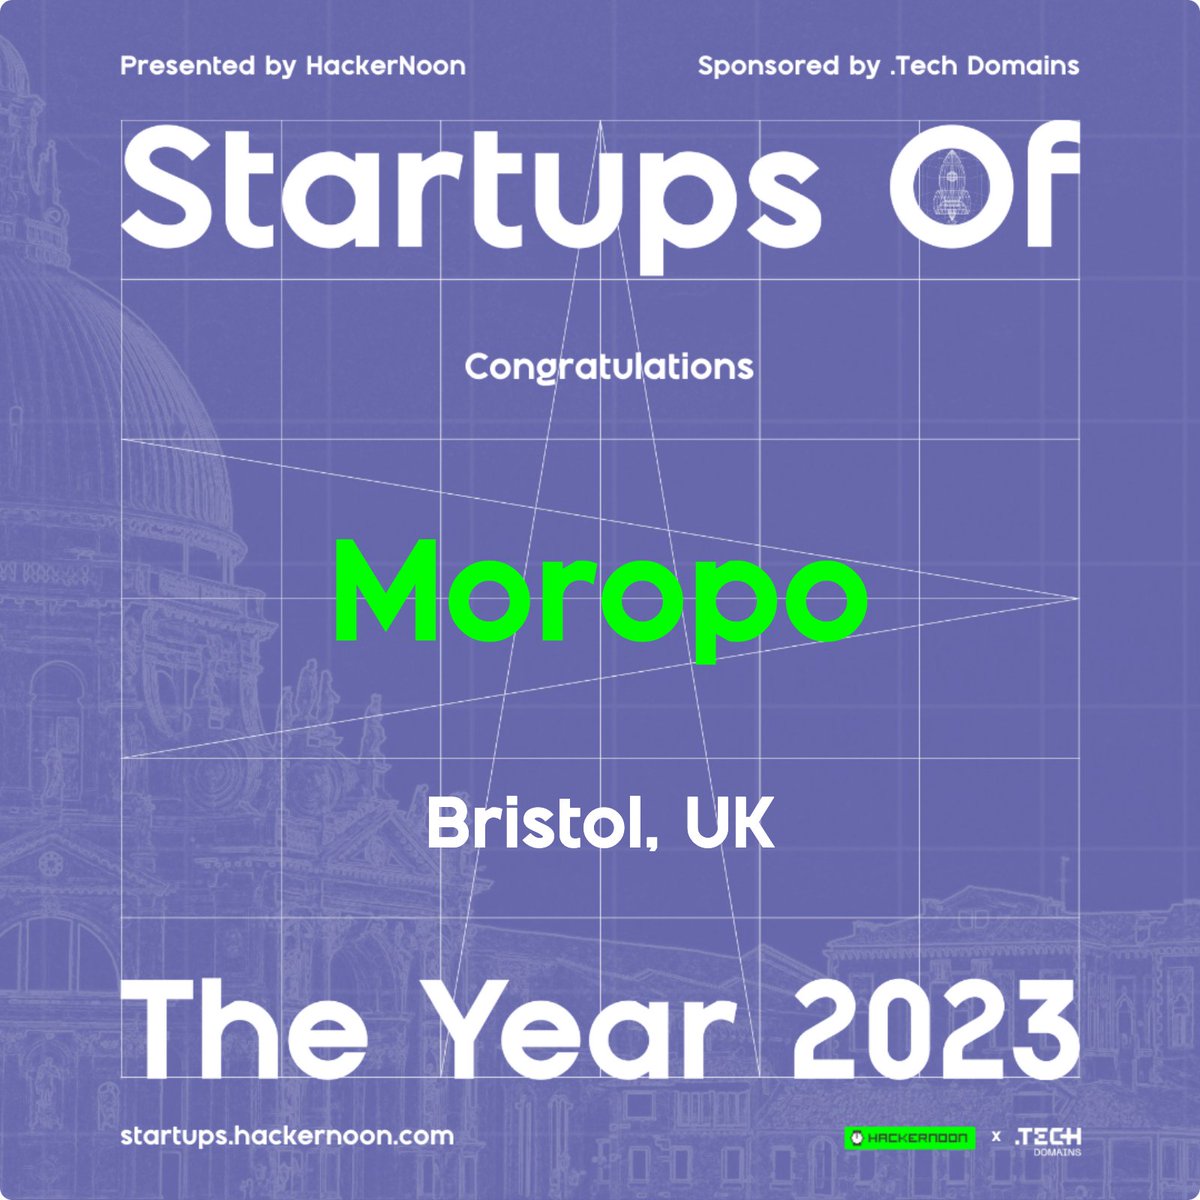 We're honoured to be voted Startup of the Year for #Bristol 🎉 It was a tough field with 20 of our city's greatest innovators on the list. Humbled. Huge thank you to everyone who voted for us. 🙌 And to @HackerNoon for hosting.